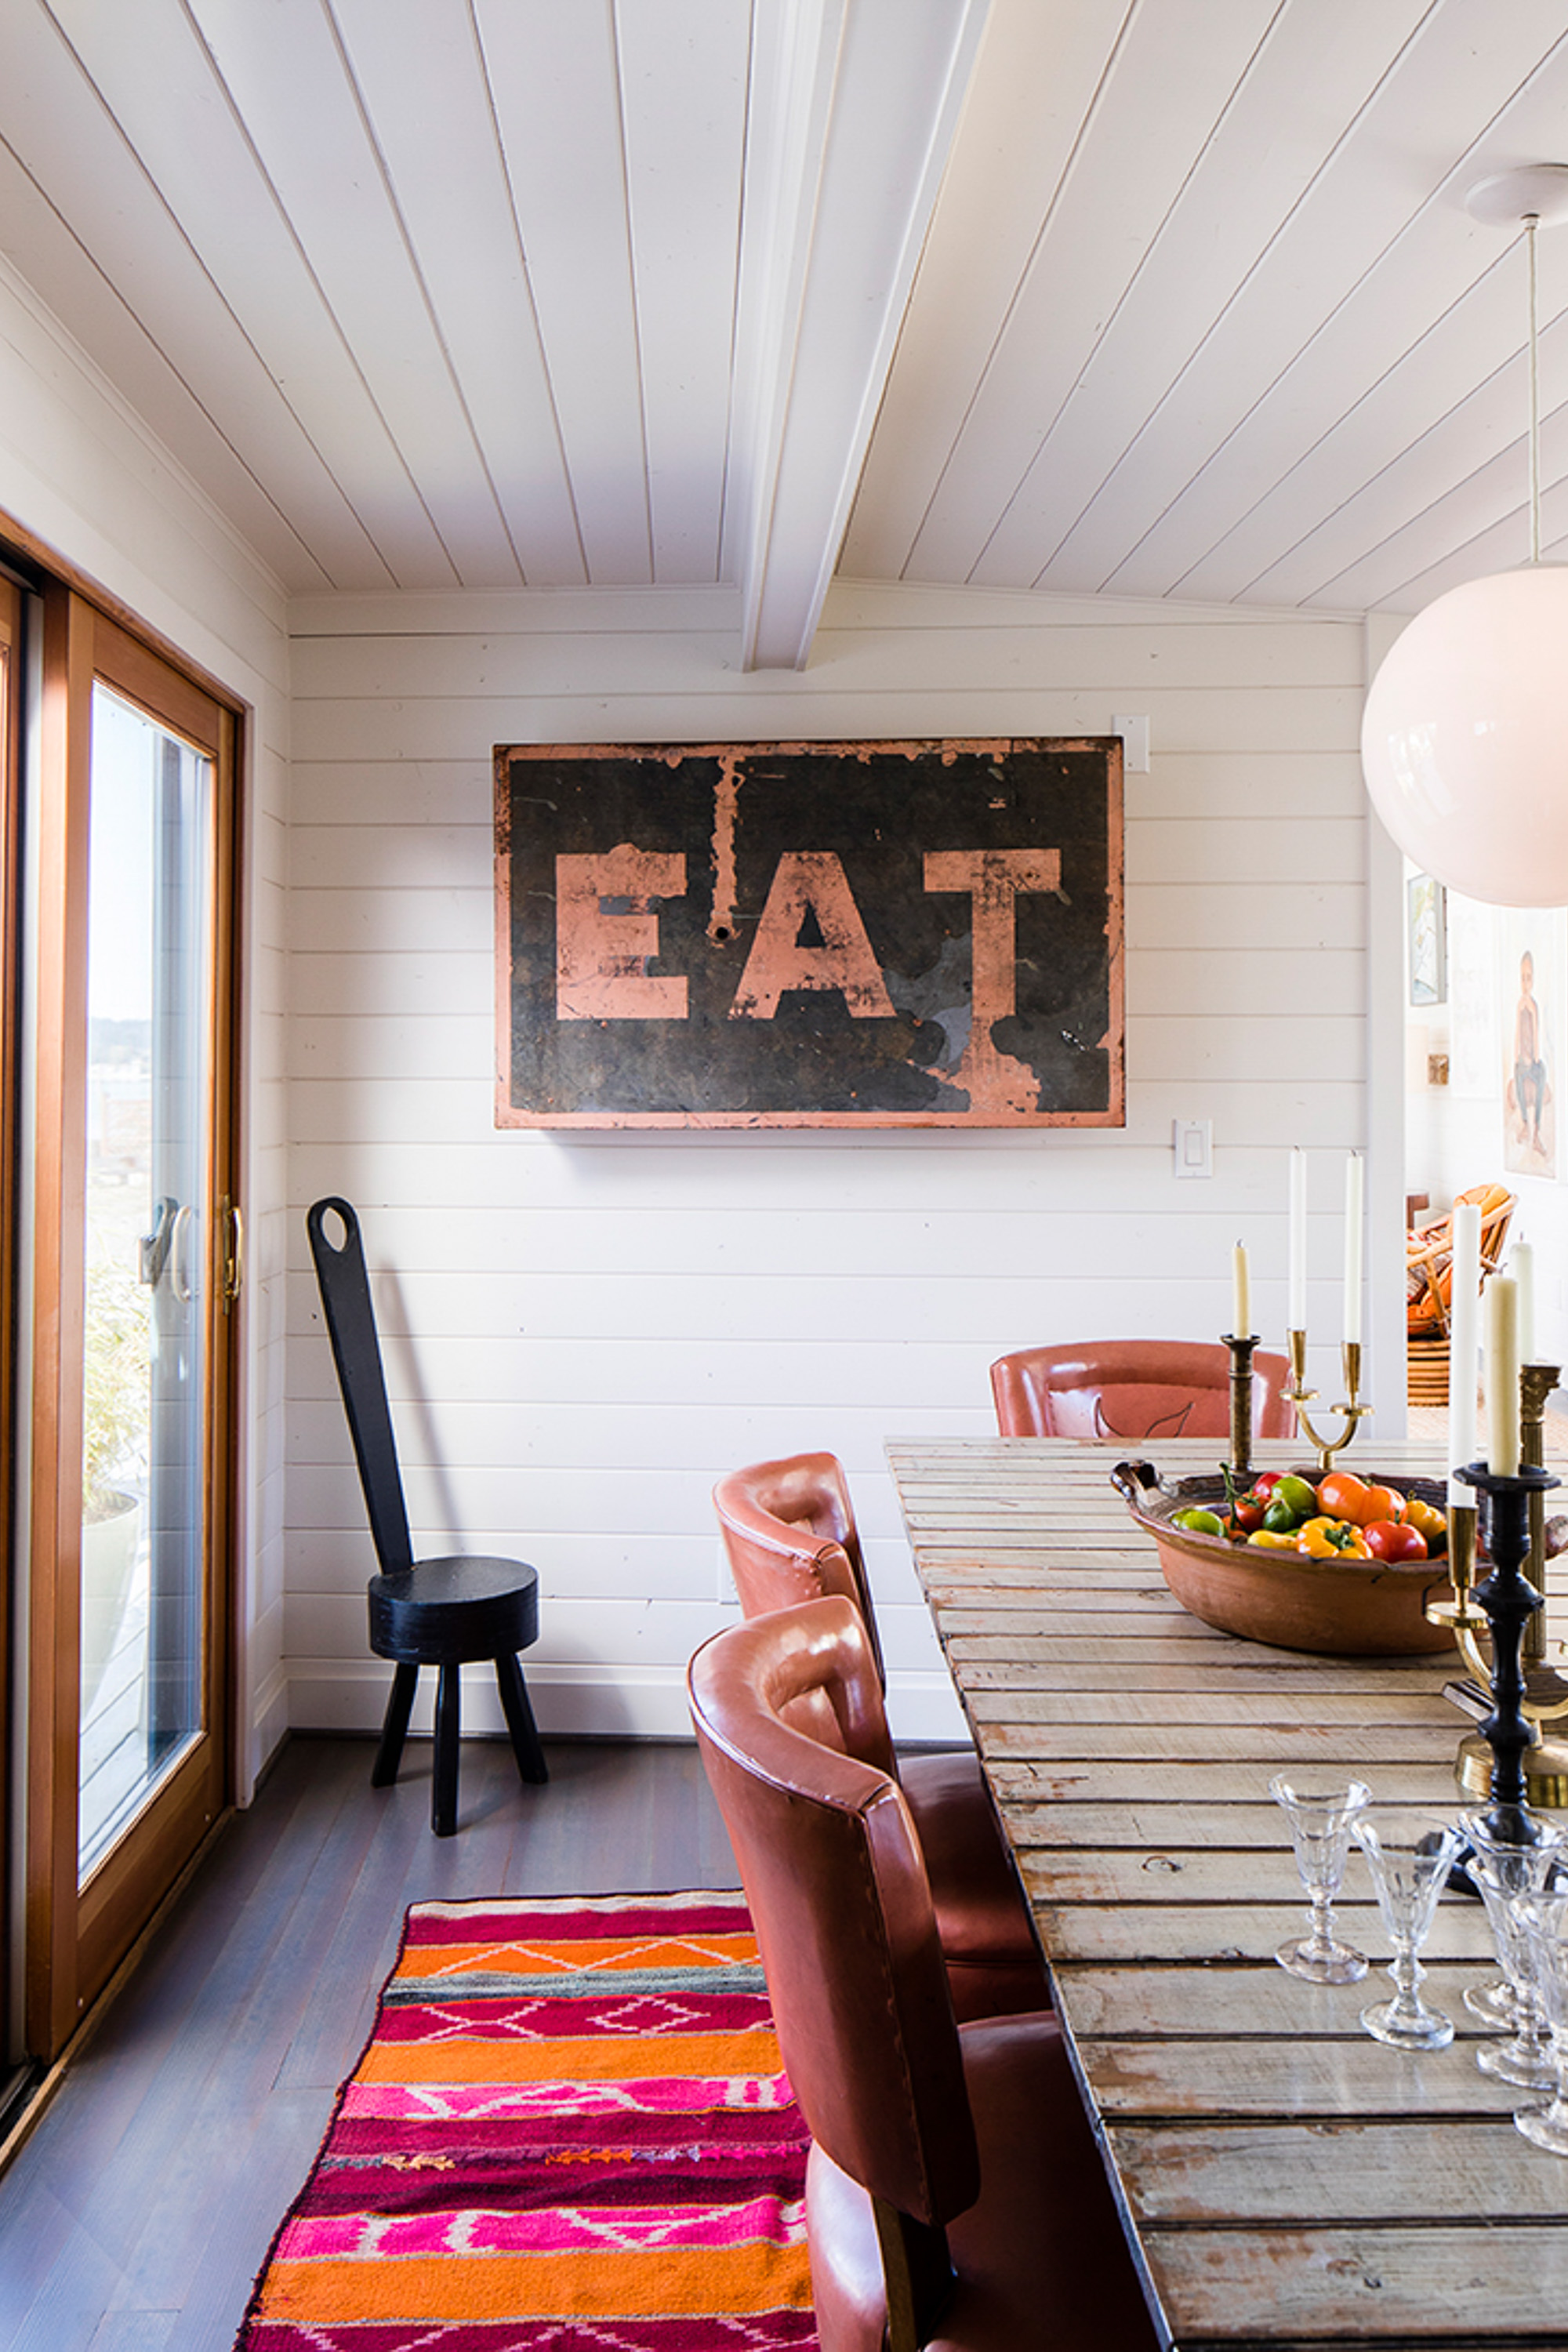 The dining area is a blend of old and new, featuring a weathered dining table crafted with salvaged barn wood, complemented by an EAT sign for added charm.